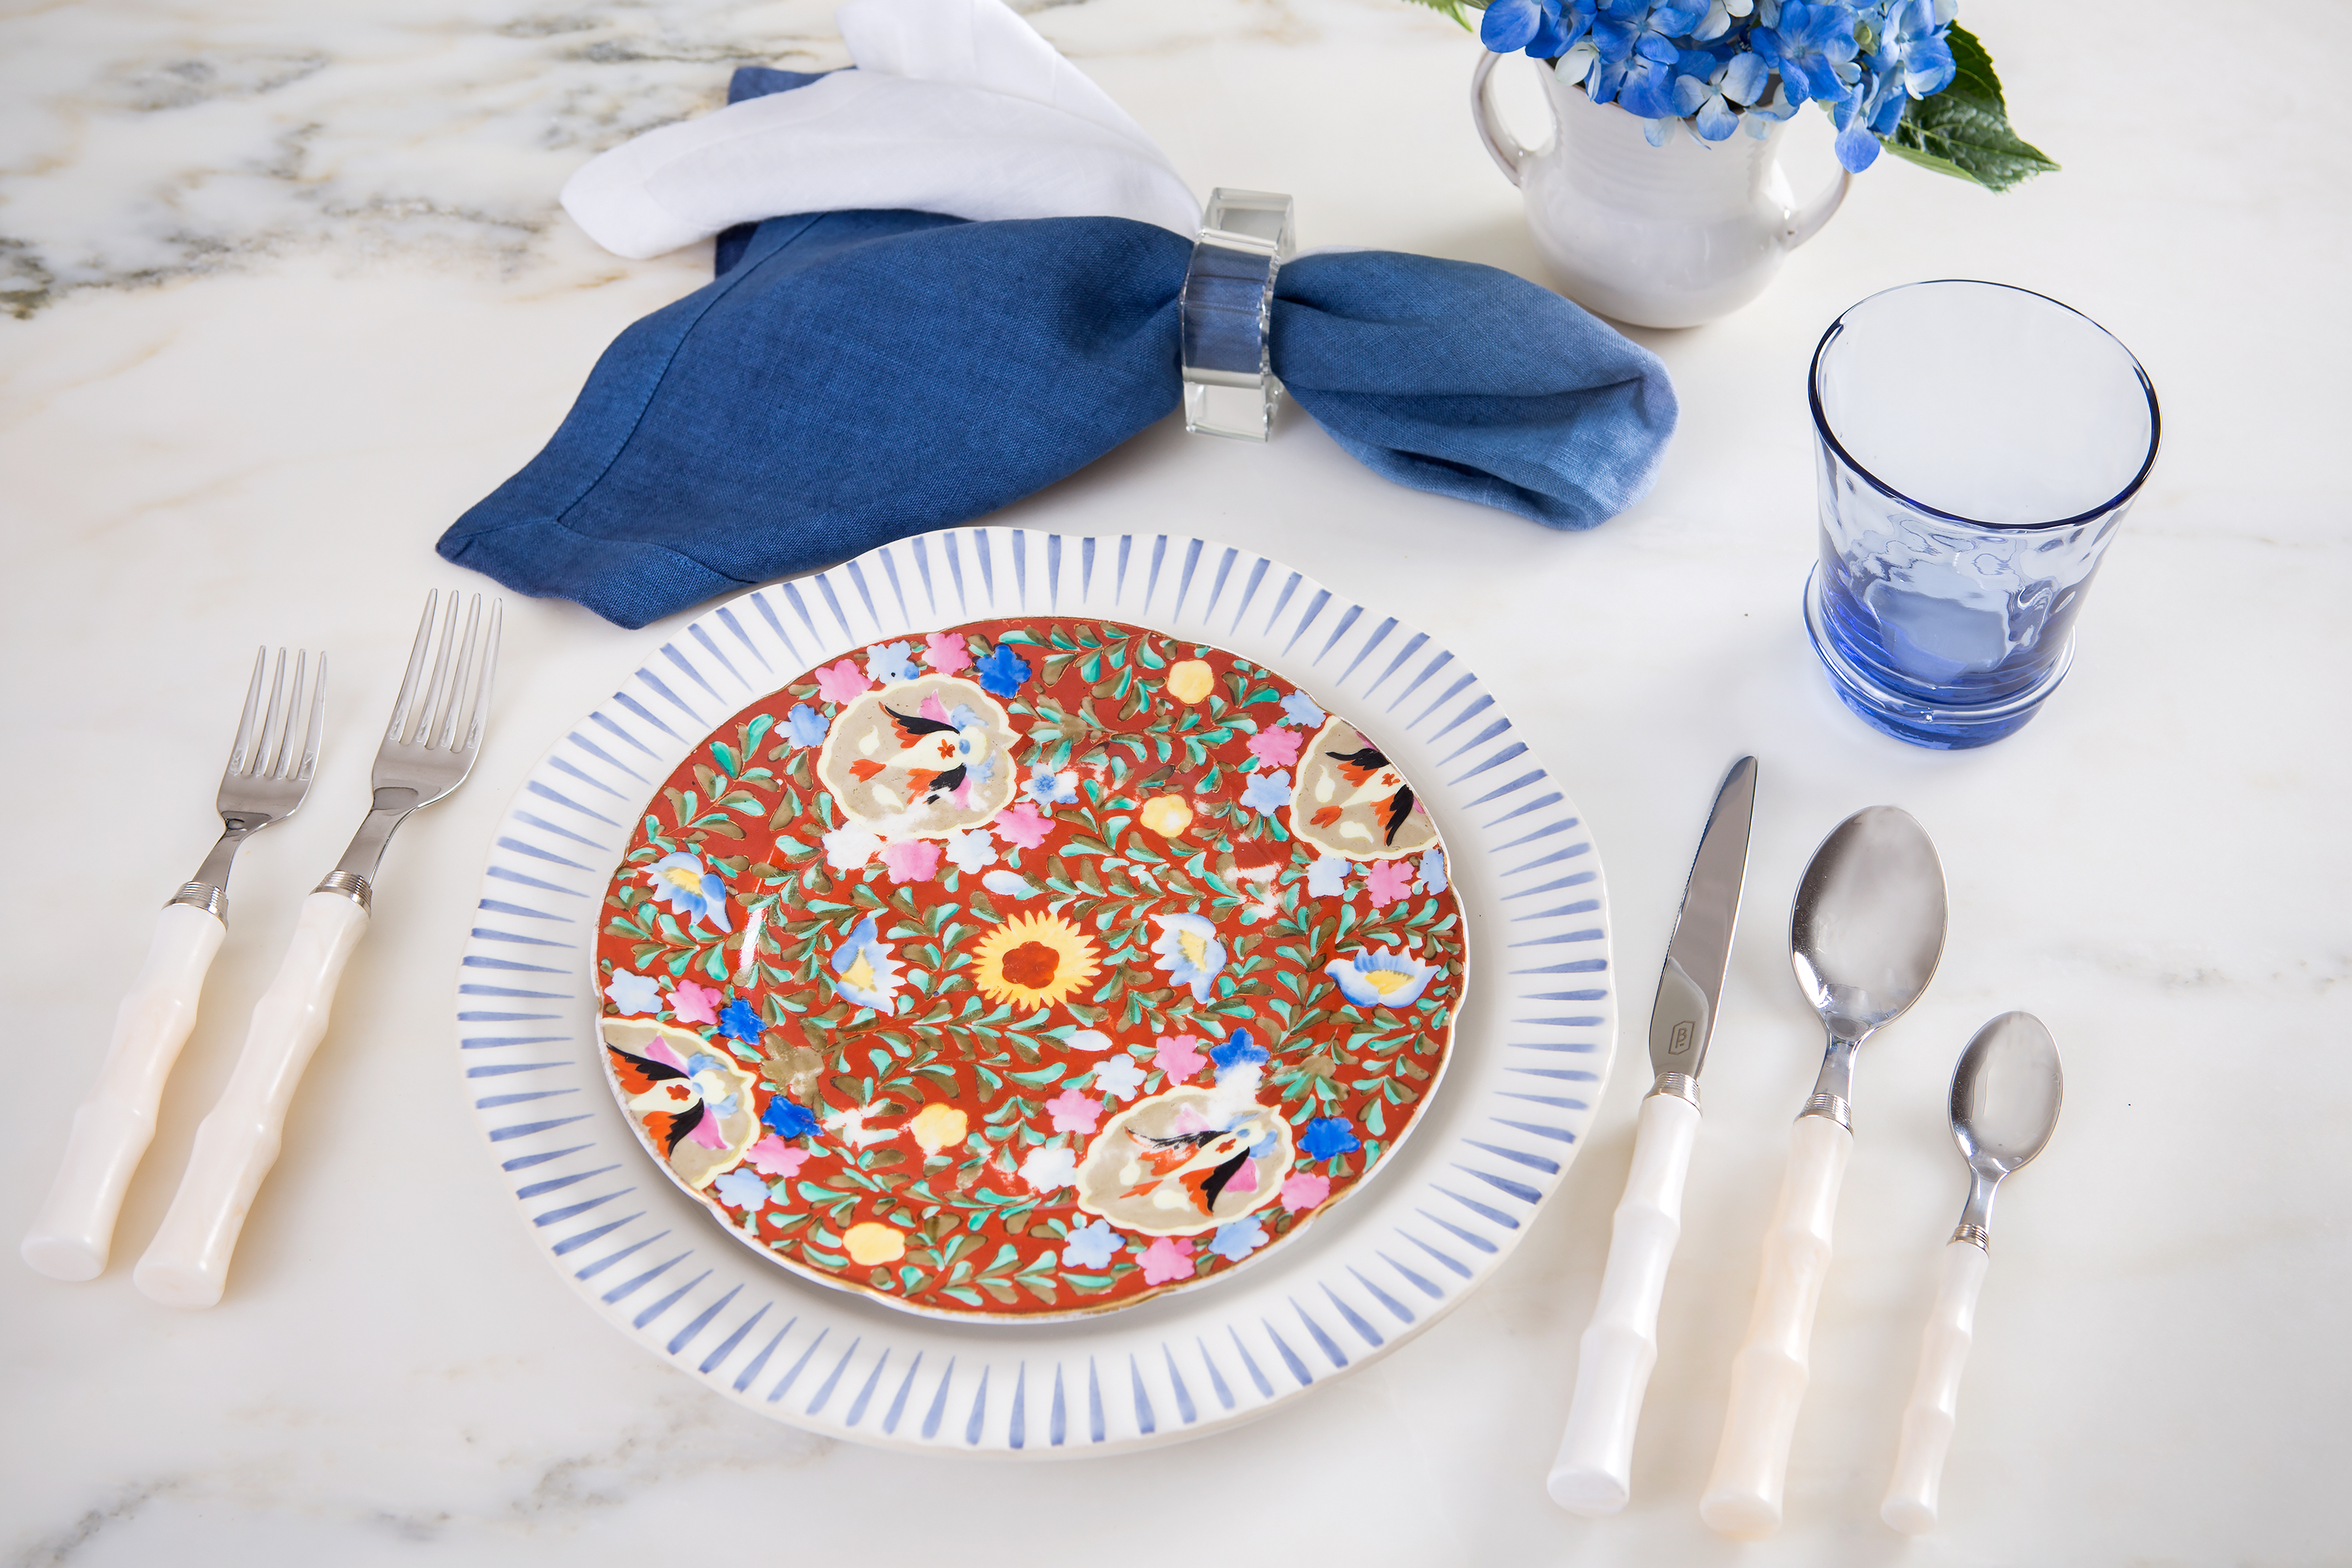 Give antique heirloom salad plates a fresh feel for a “rise and shine” brunch! Pair with Juliska Sitio Stripe Indigo plate, Carine blue tumbler, and napkin for a crisp blue and white theme. Blue Pheasant Montecito Ivory Acrylic place 
setting adds flair to any grouping, non(e)such.
